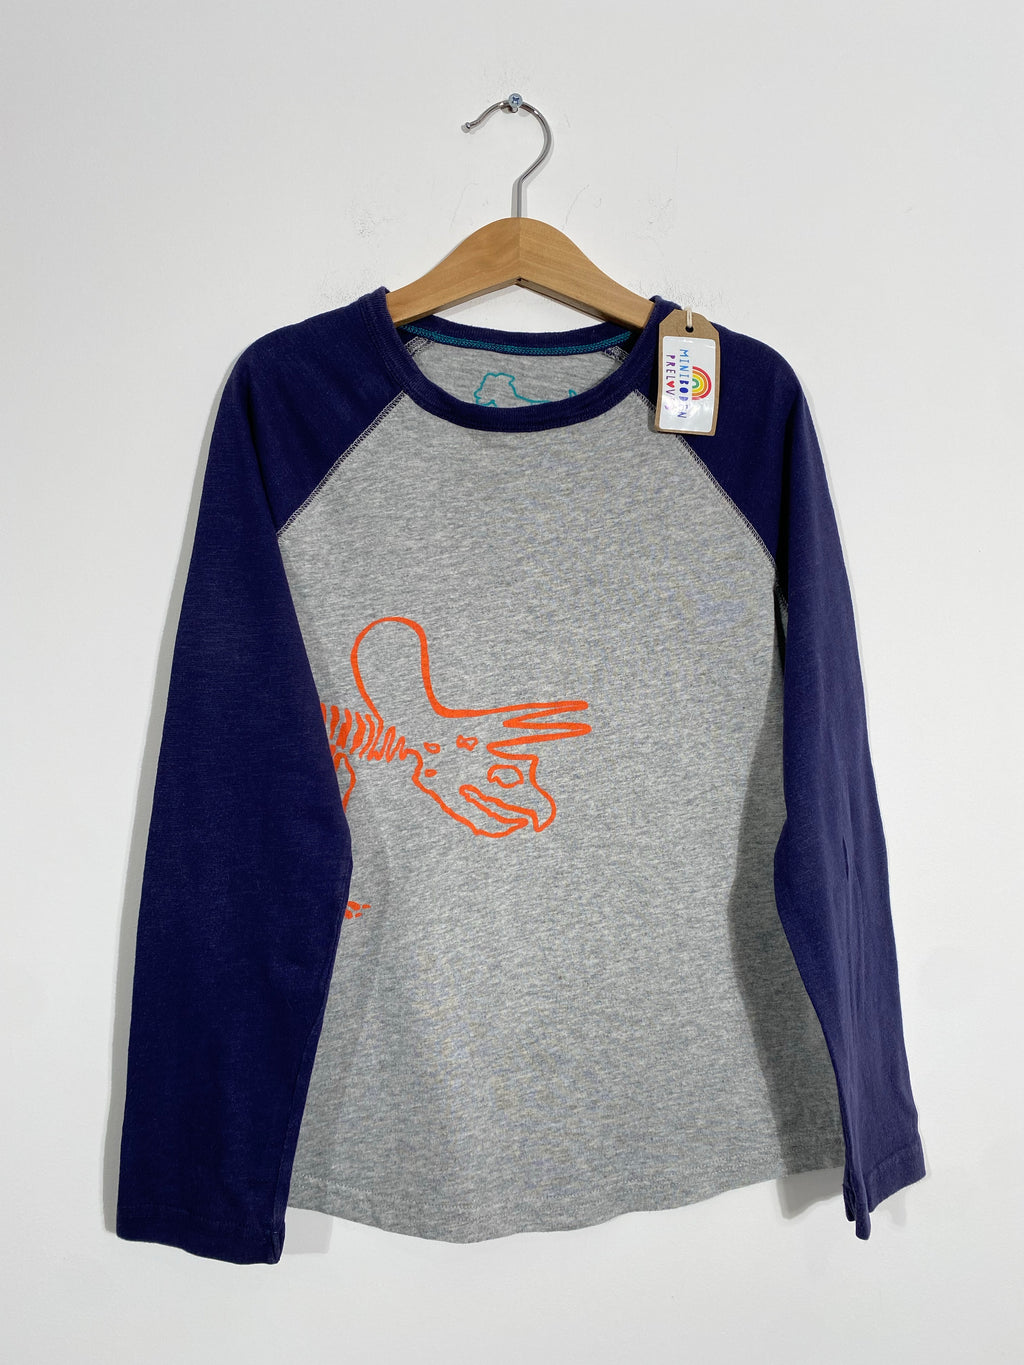 Lovely Dino Print Grey Top (6-7 Years)